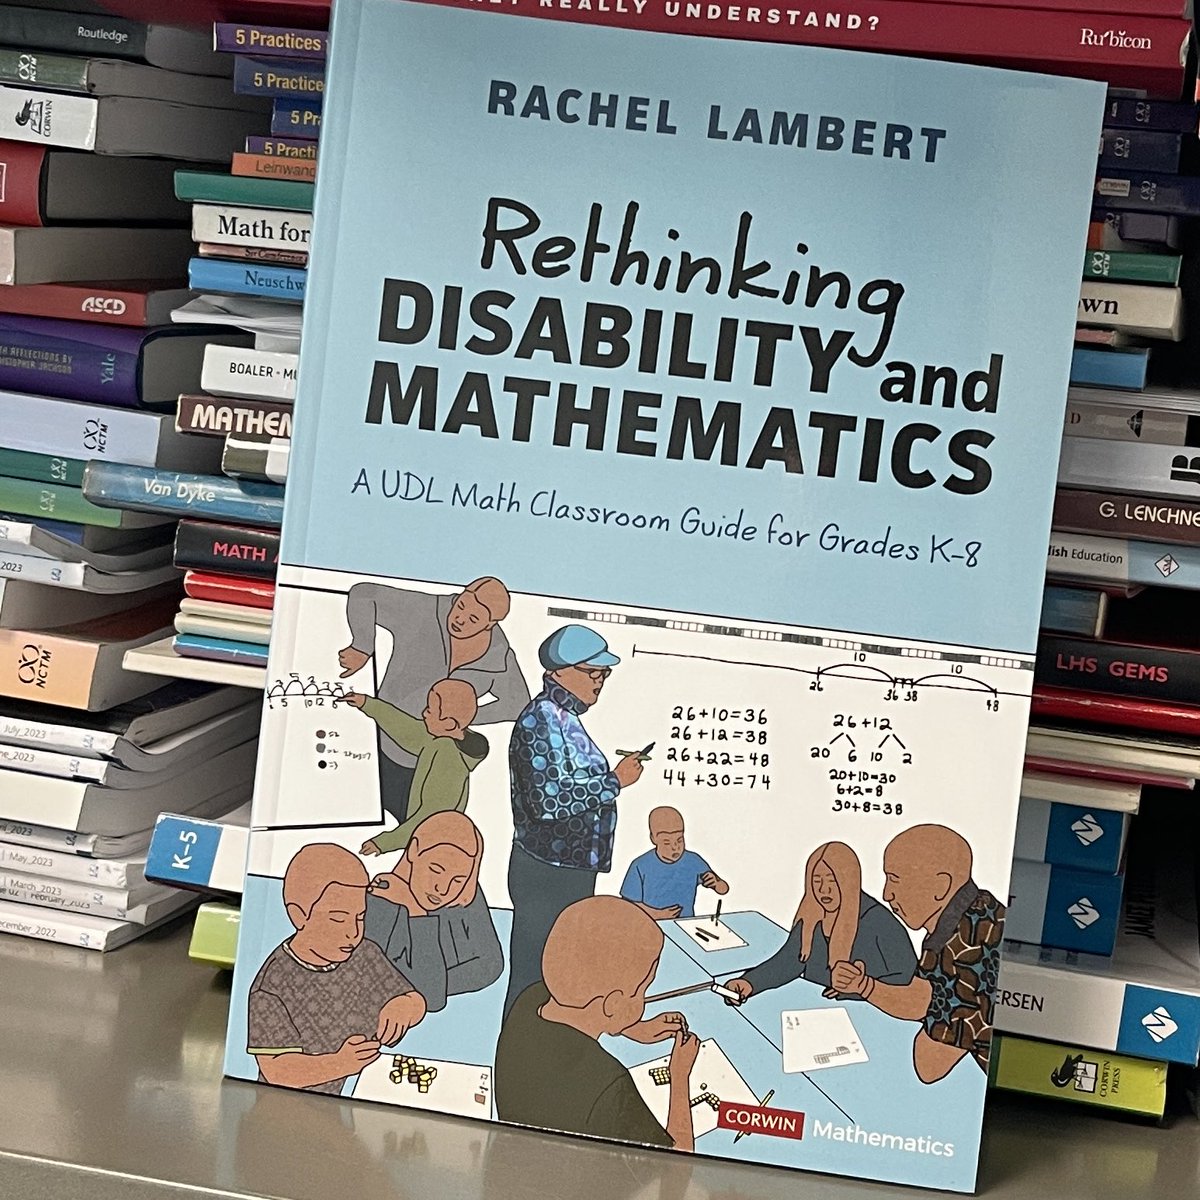 Oh my goodness. My book just arrived yesterday. I started reading it today. It is such a joy to read. Put down whatever you are doing and buy this book. You can thank me later. @mathematize4all